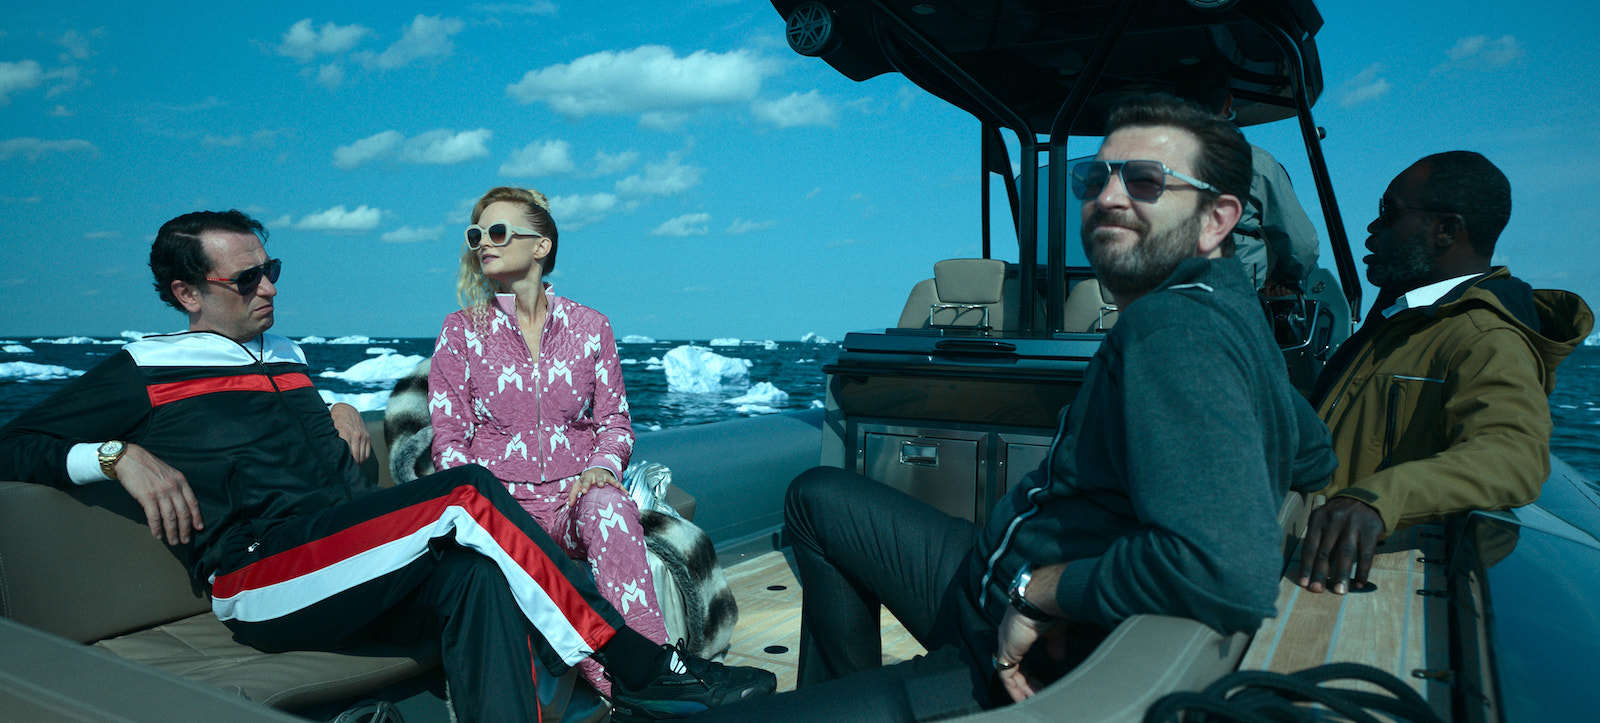 two men and a women dressed inexpensive athleisure clothing on a boat near ice floats